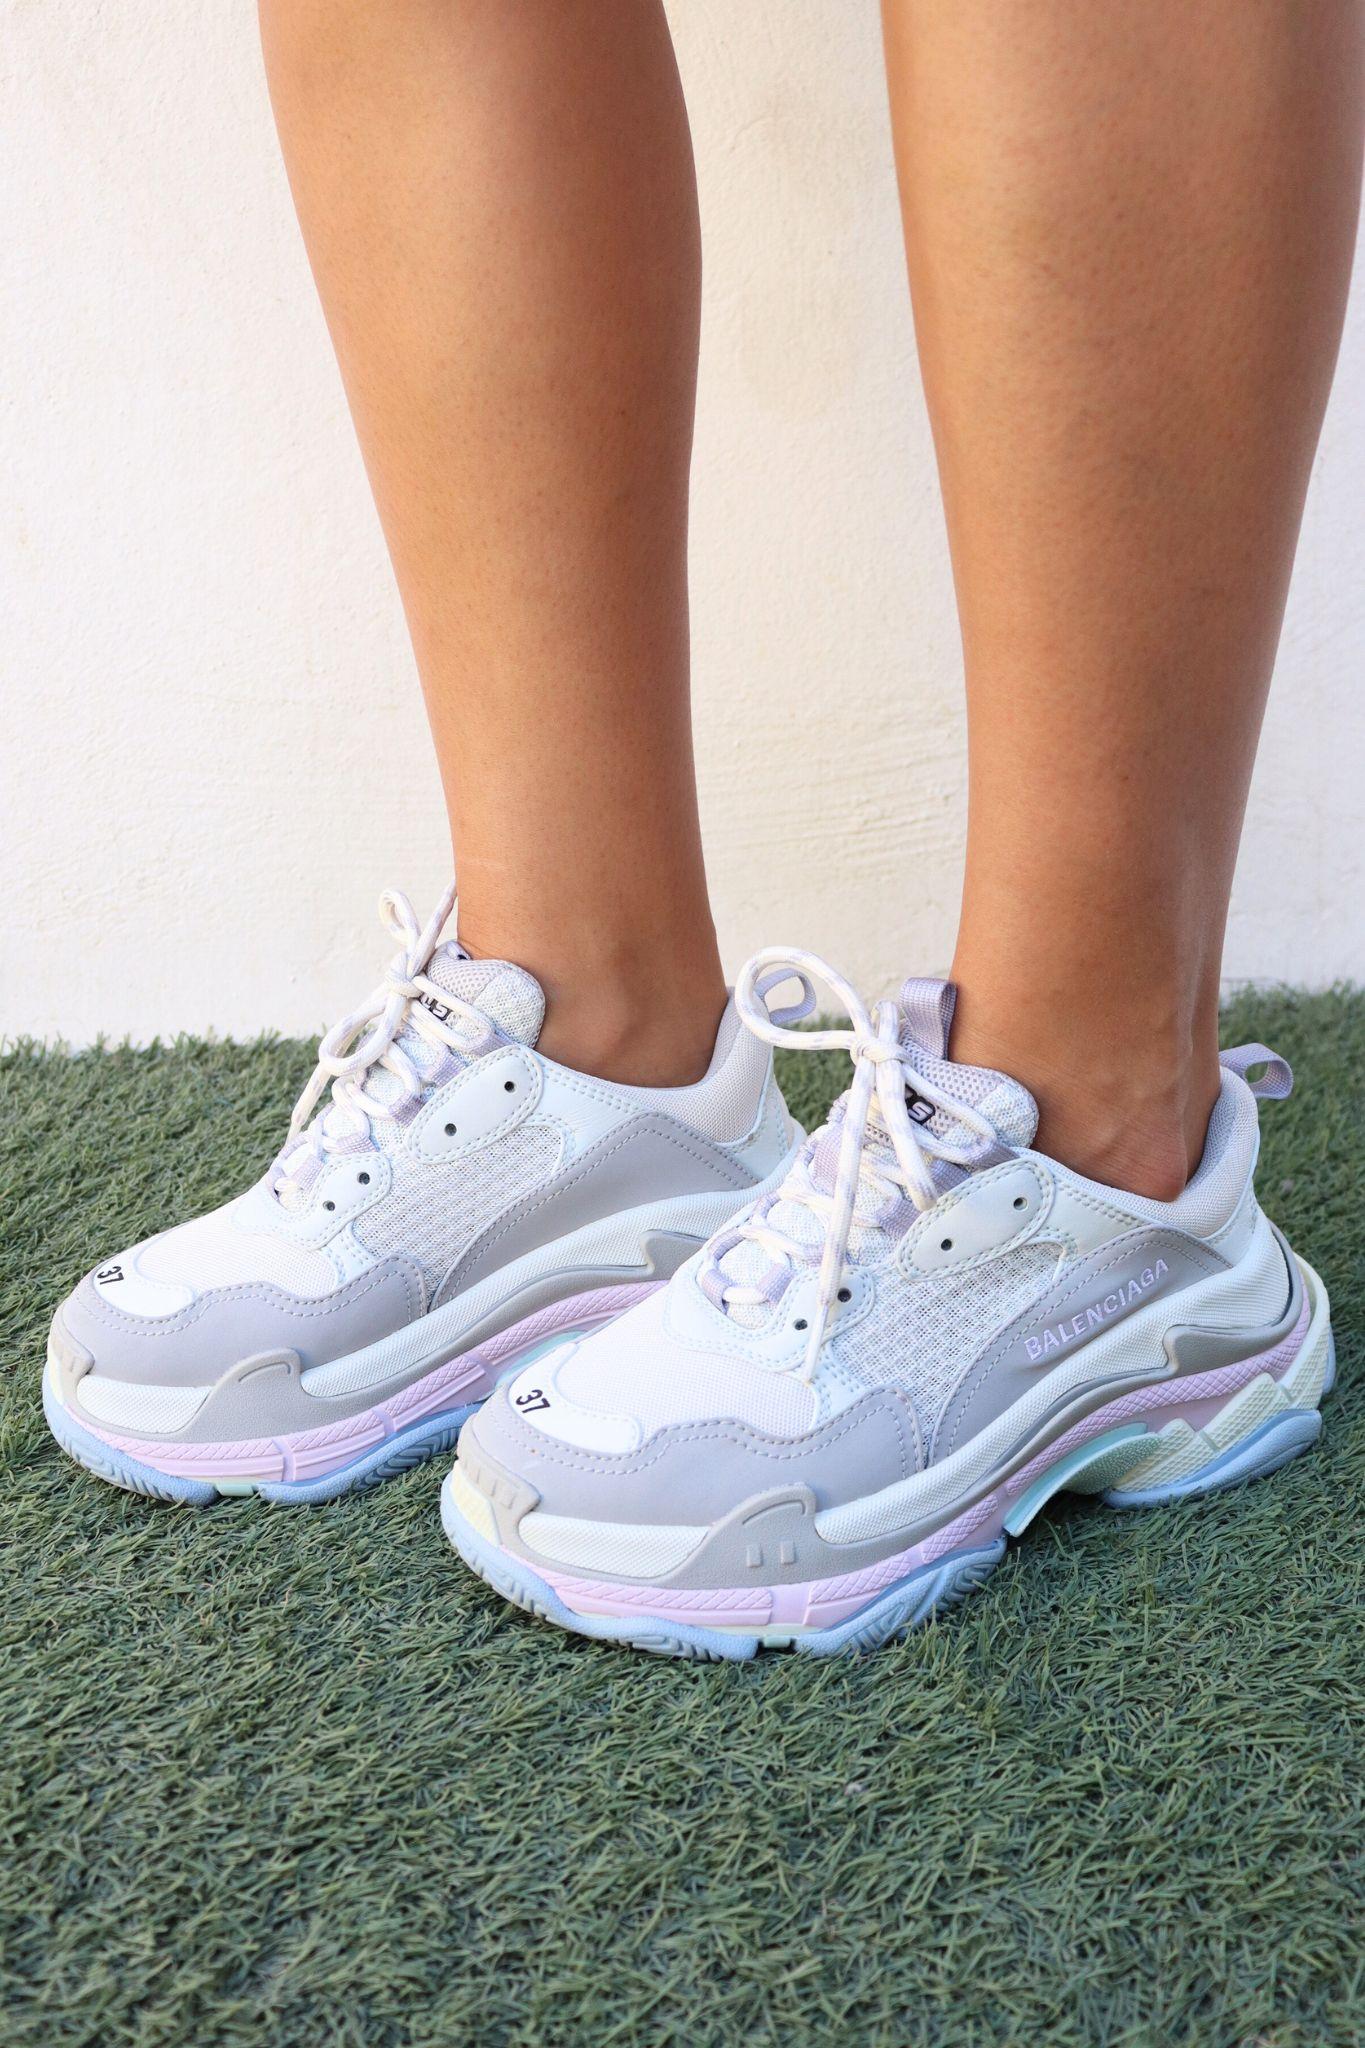 Balenciaga Off White/Grey Mesh and Nubuck Triple S Lace Up Sneakers.

Material: Leather and Mesh
Size: EU 37
Overall Condition: Excellent
Interior Condition: Like New
Exterior Condition: A stain on the sole.